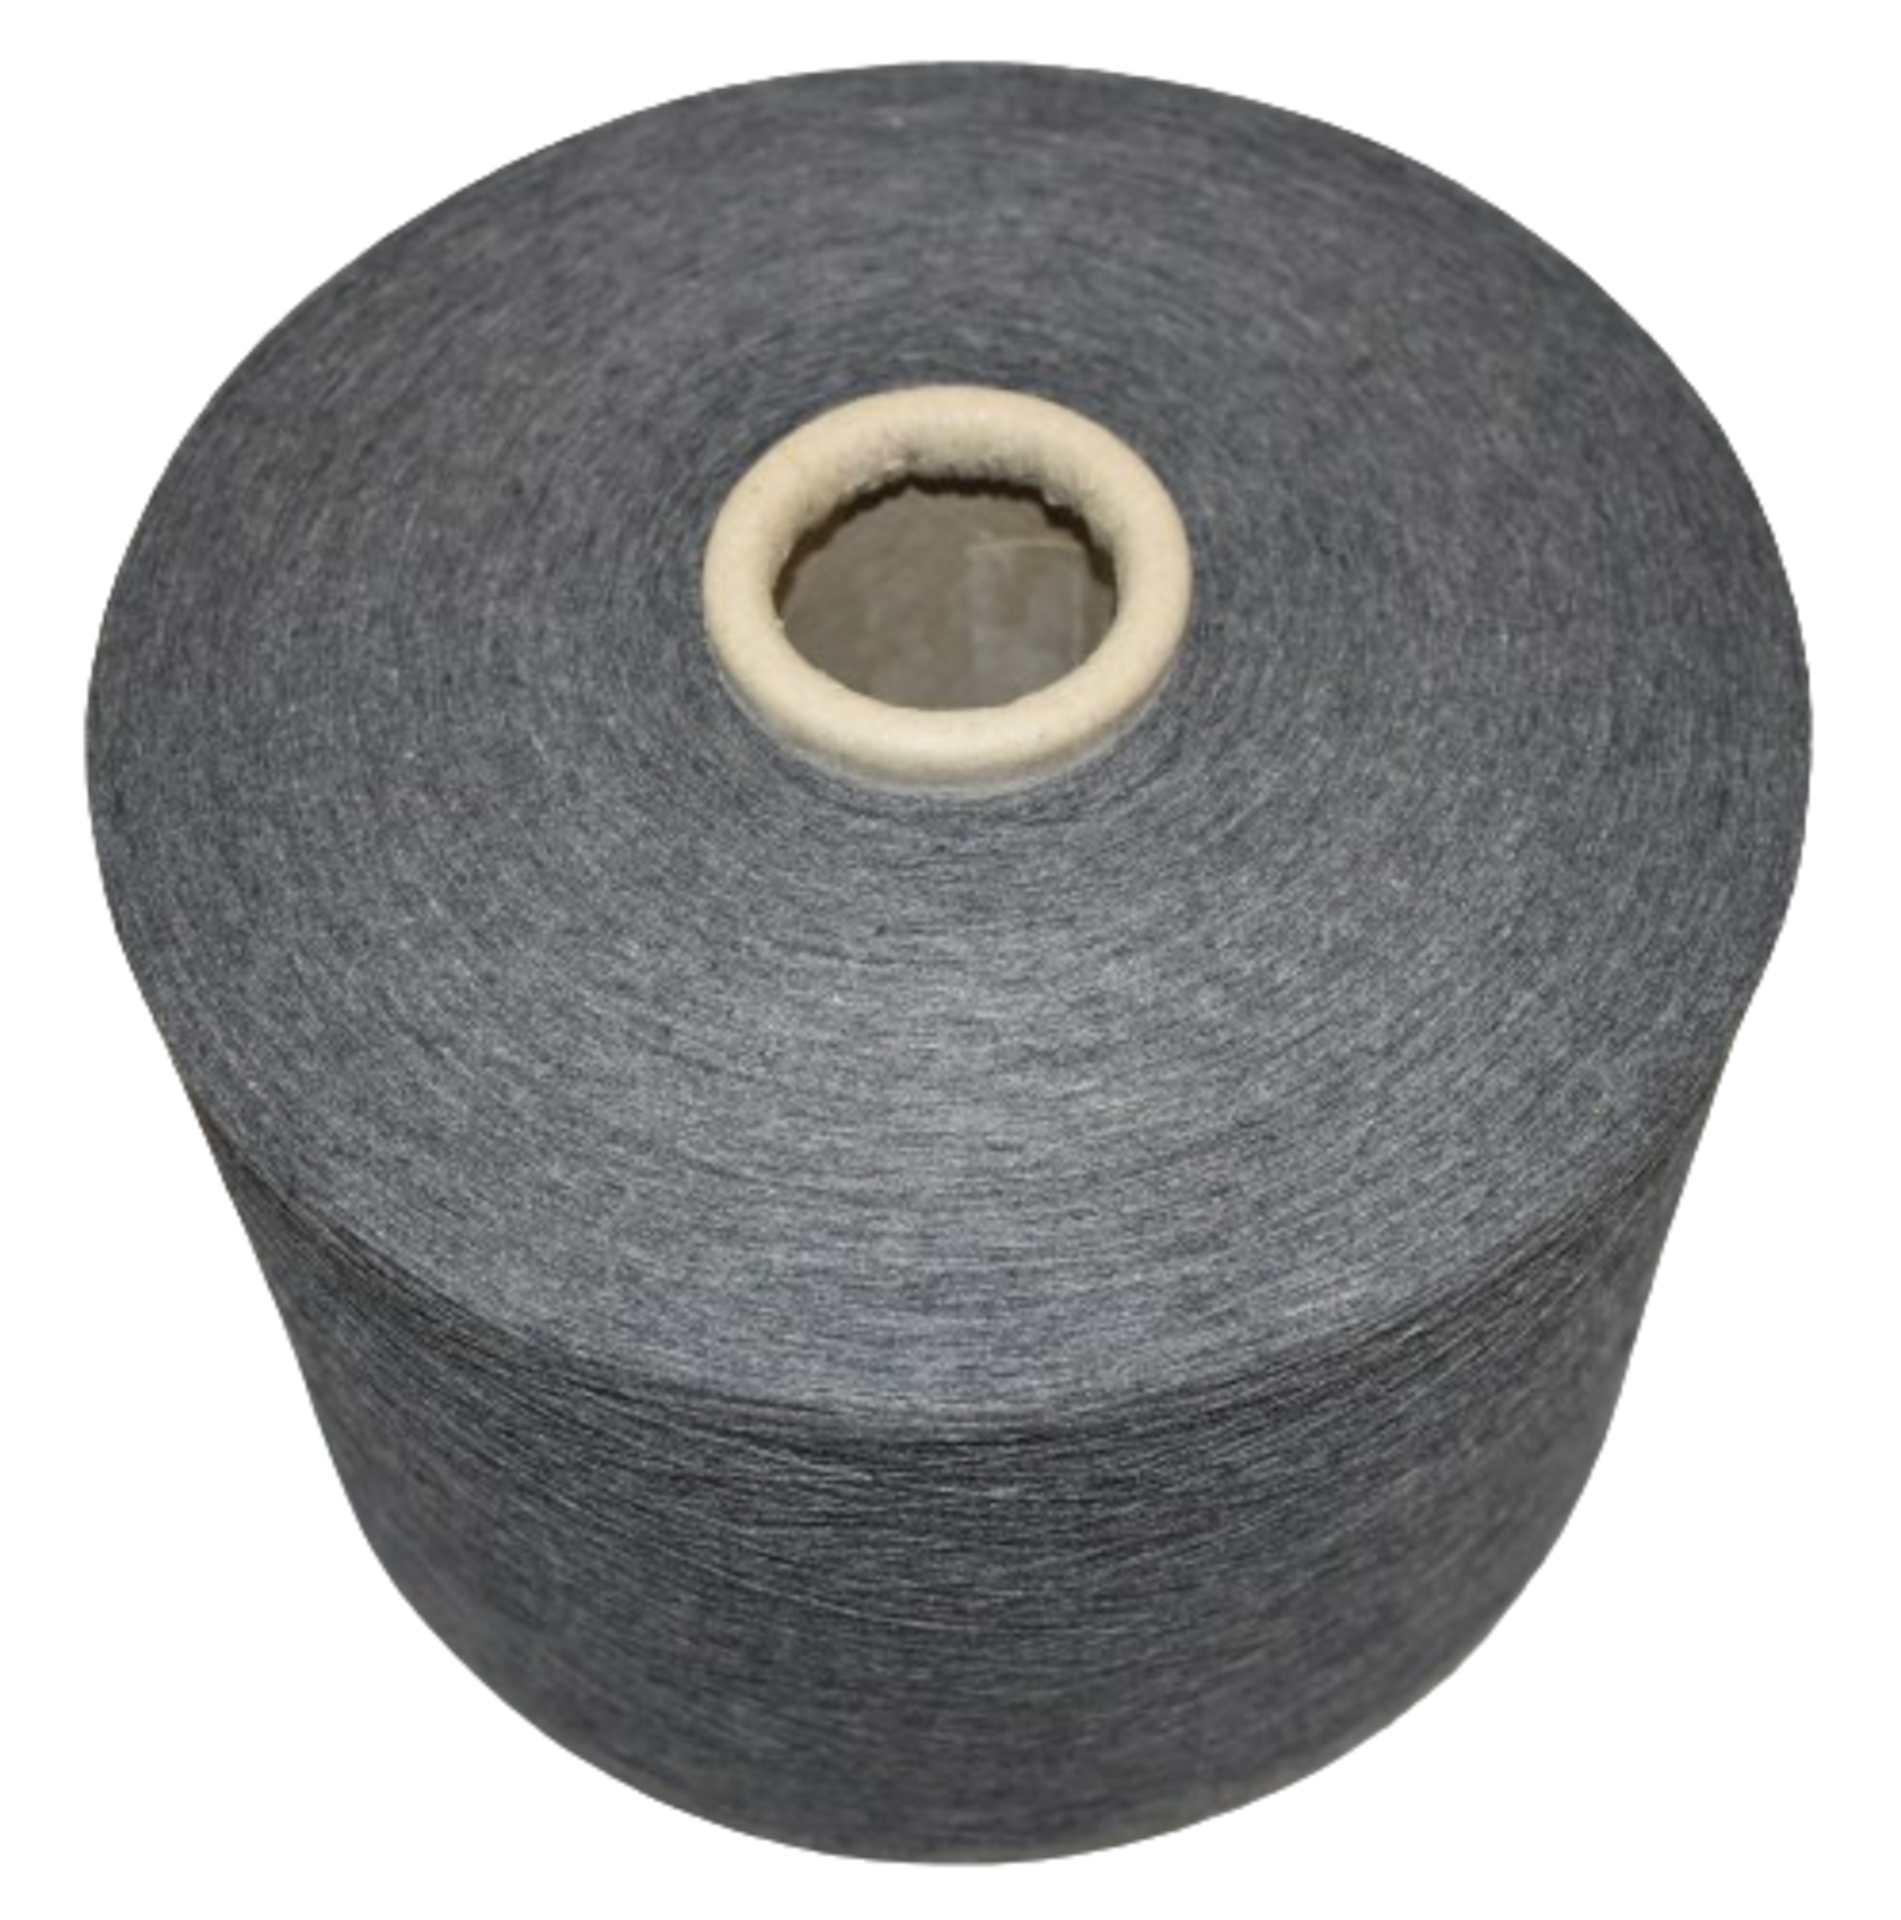 10 x Cones of 1/13 MicroCotton Knitting Yarn - Mid Grey - Approx Weight: 2,500g - New Stock ABL Yarn - Image 2 of 11